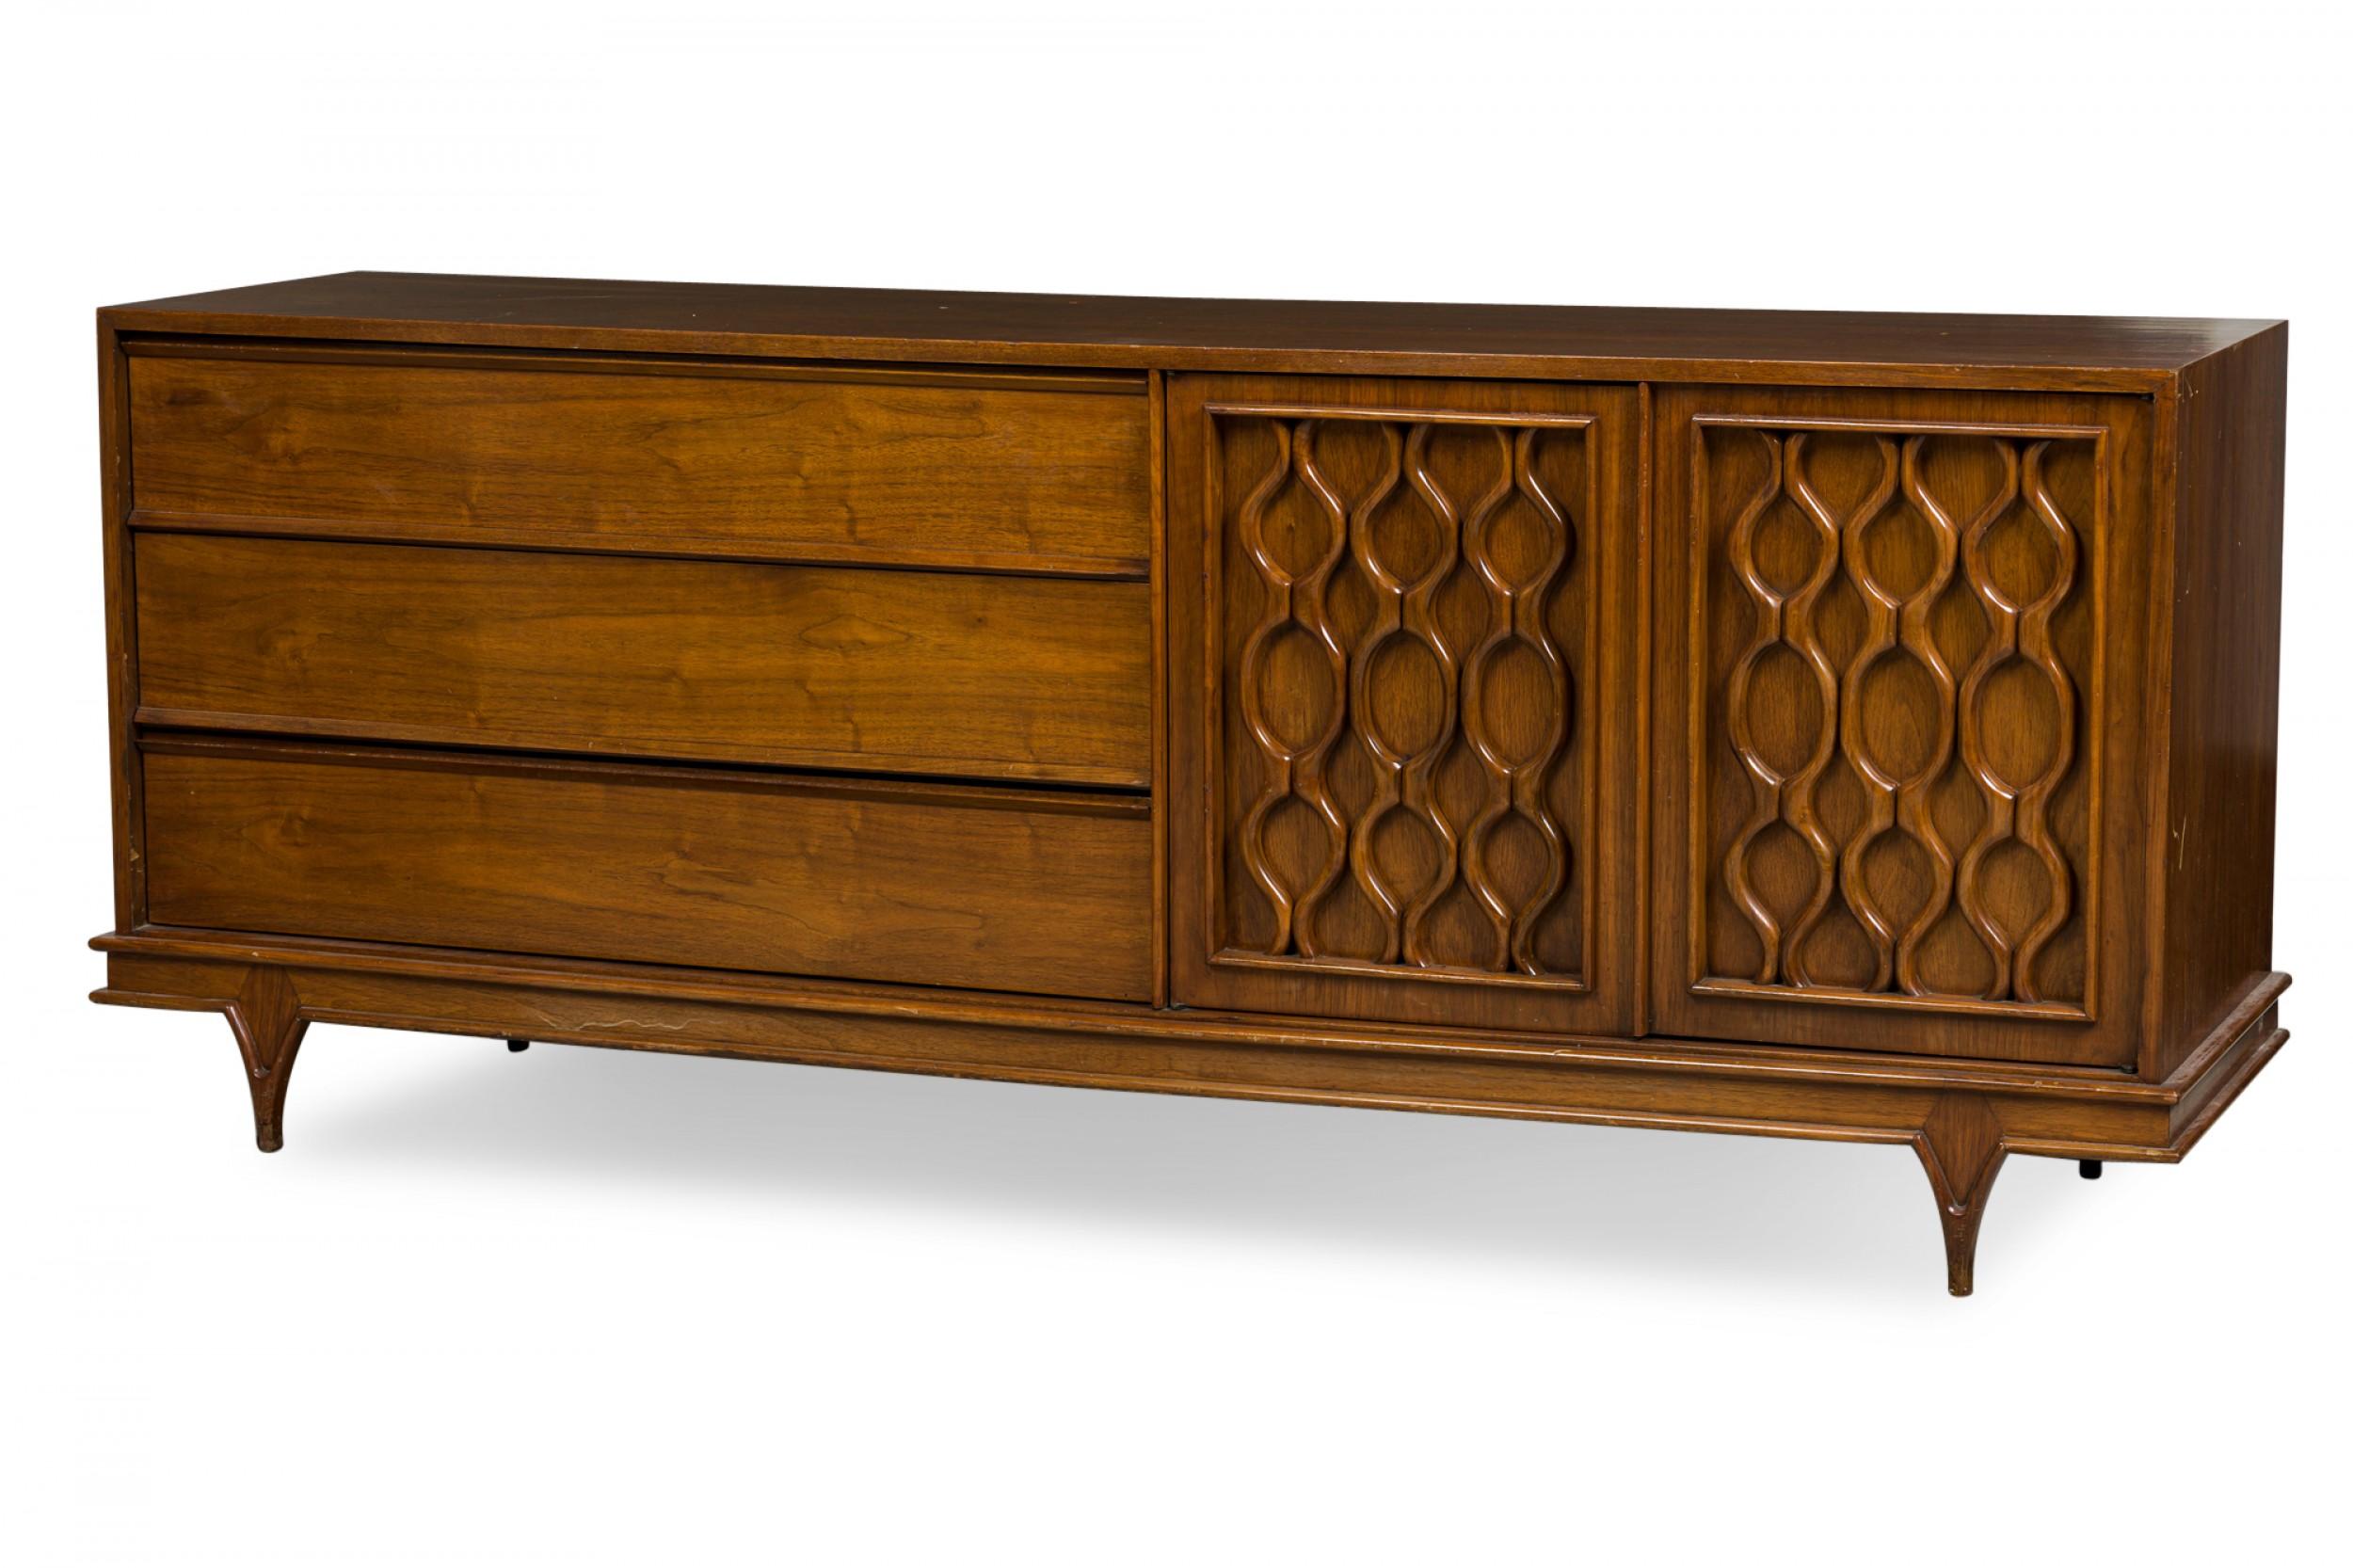 StanleyAmerican Mid-Century Modern Walnut Geometric Carved Front Sideboard In Good Condition For Sale In New York, NY